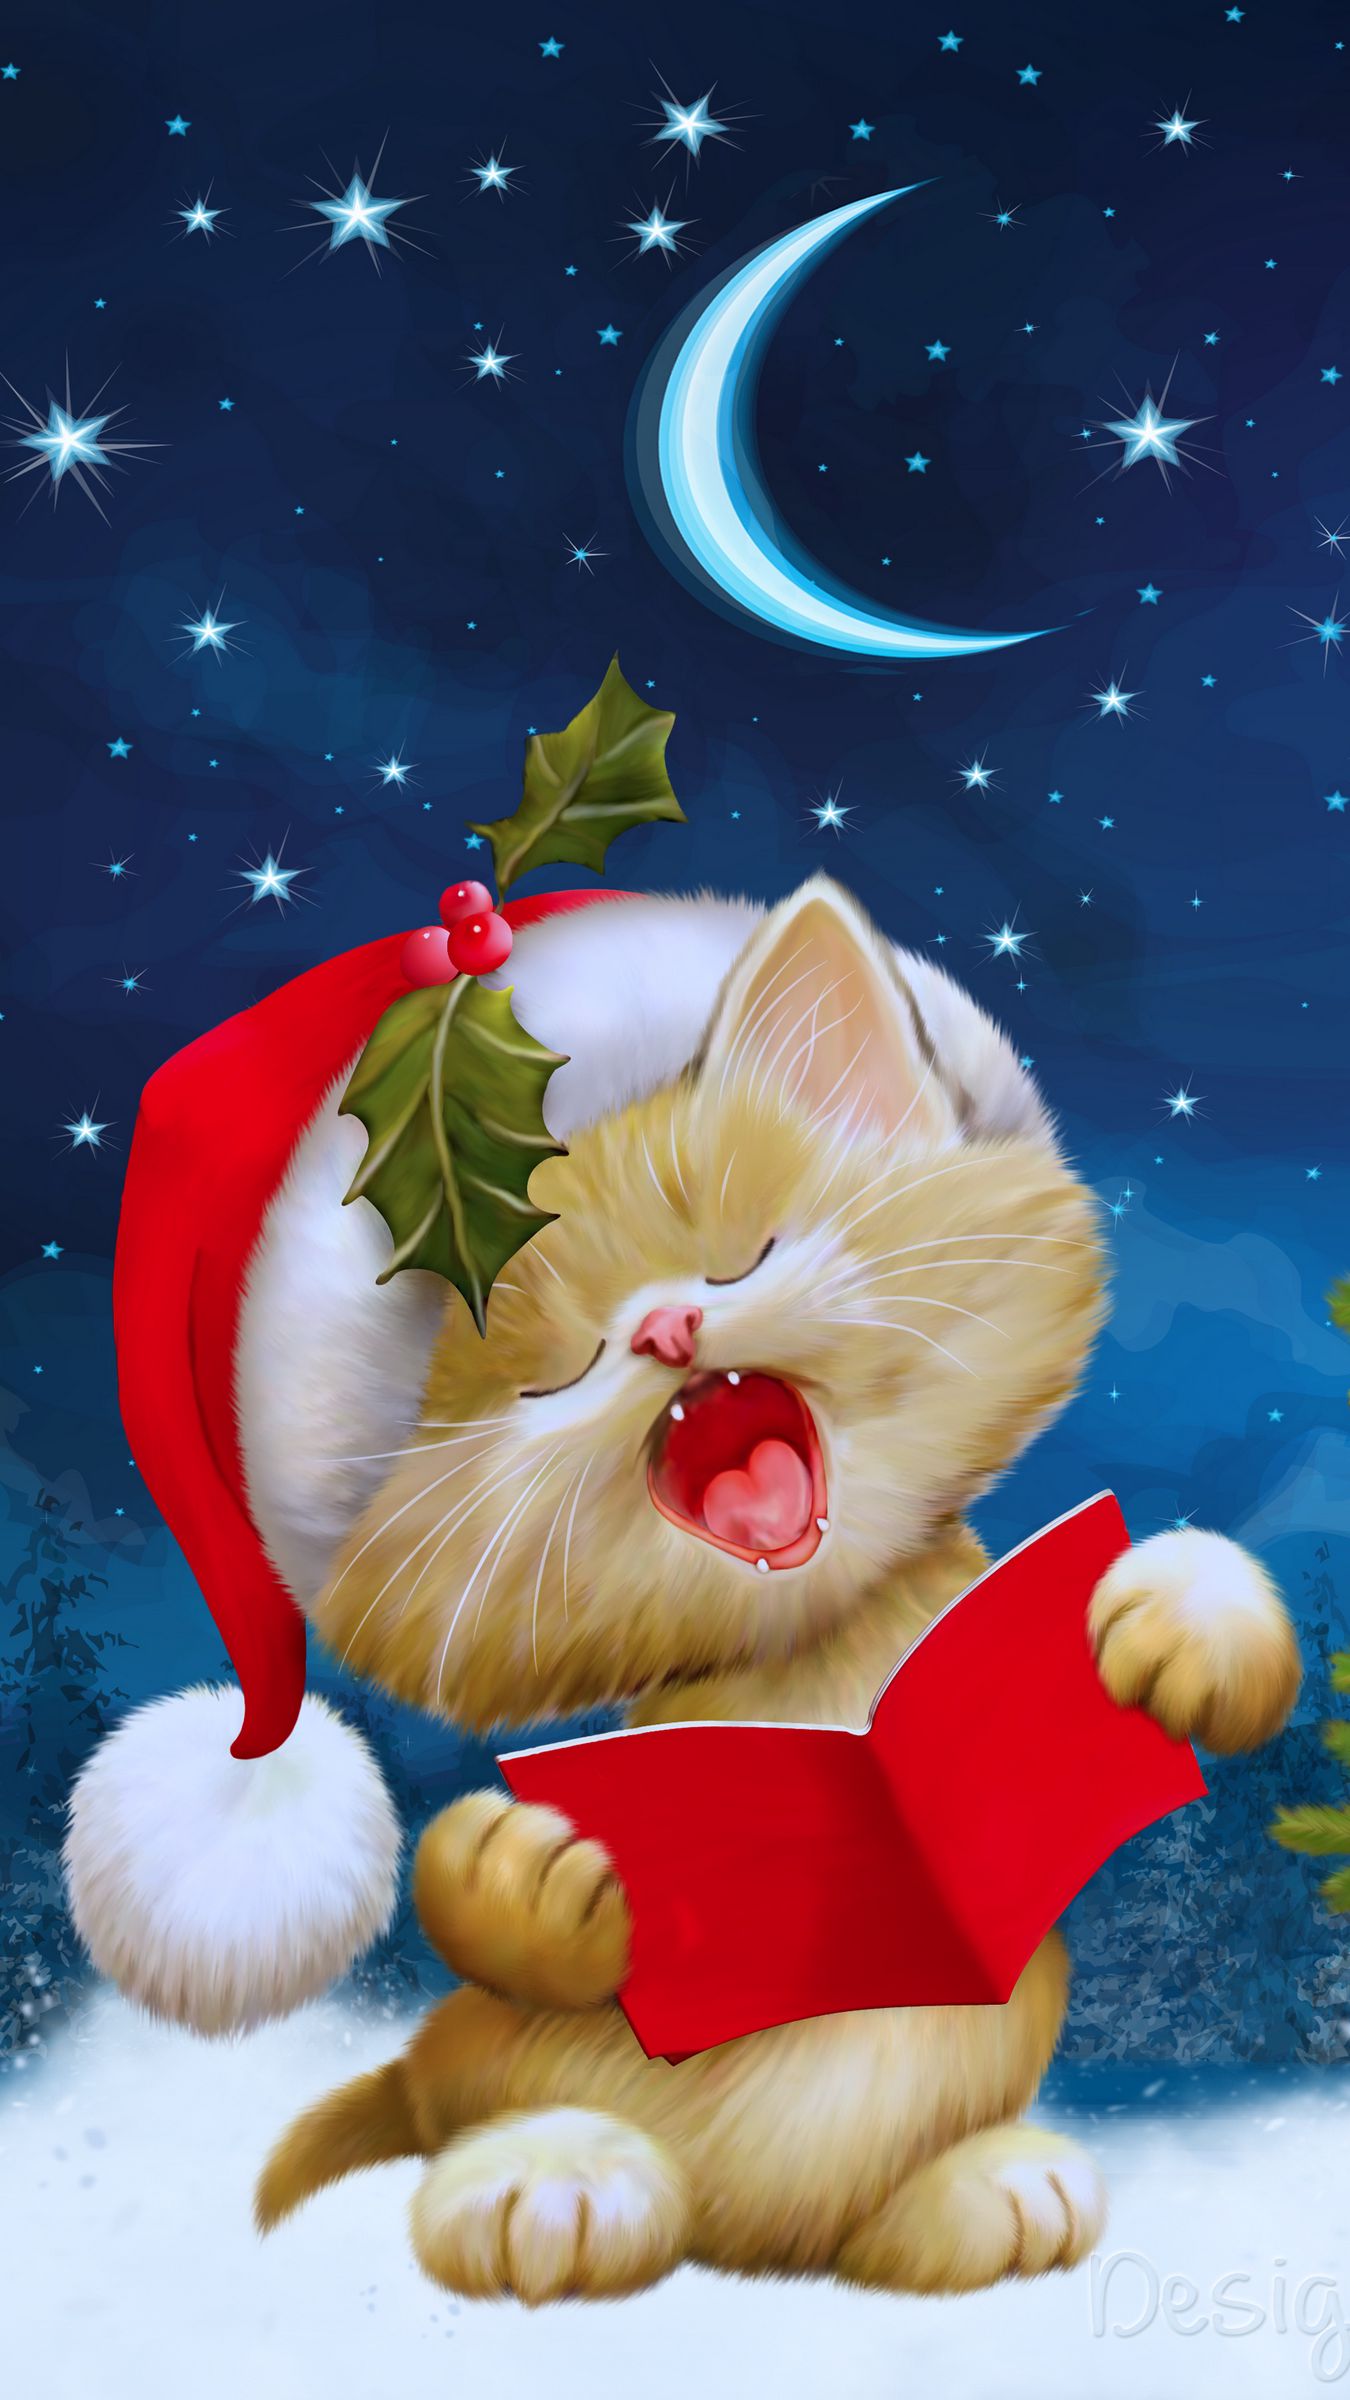 Download wallpaper 1350x2400 new year, christmas, cat, card iphone 8+/7+/6s+/for parallax HD background